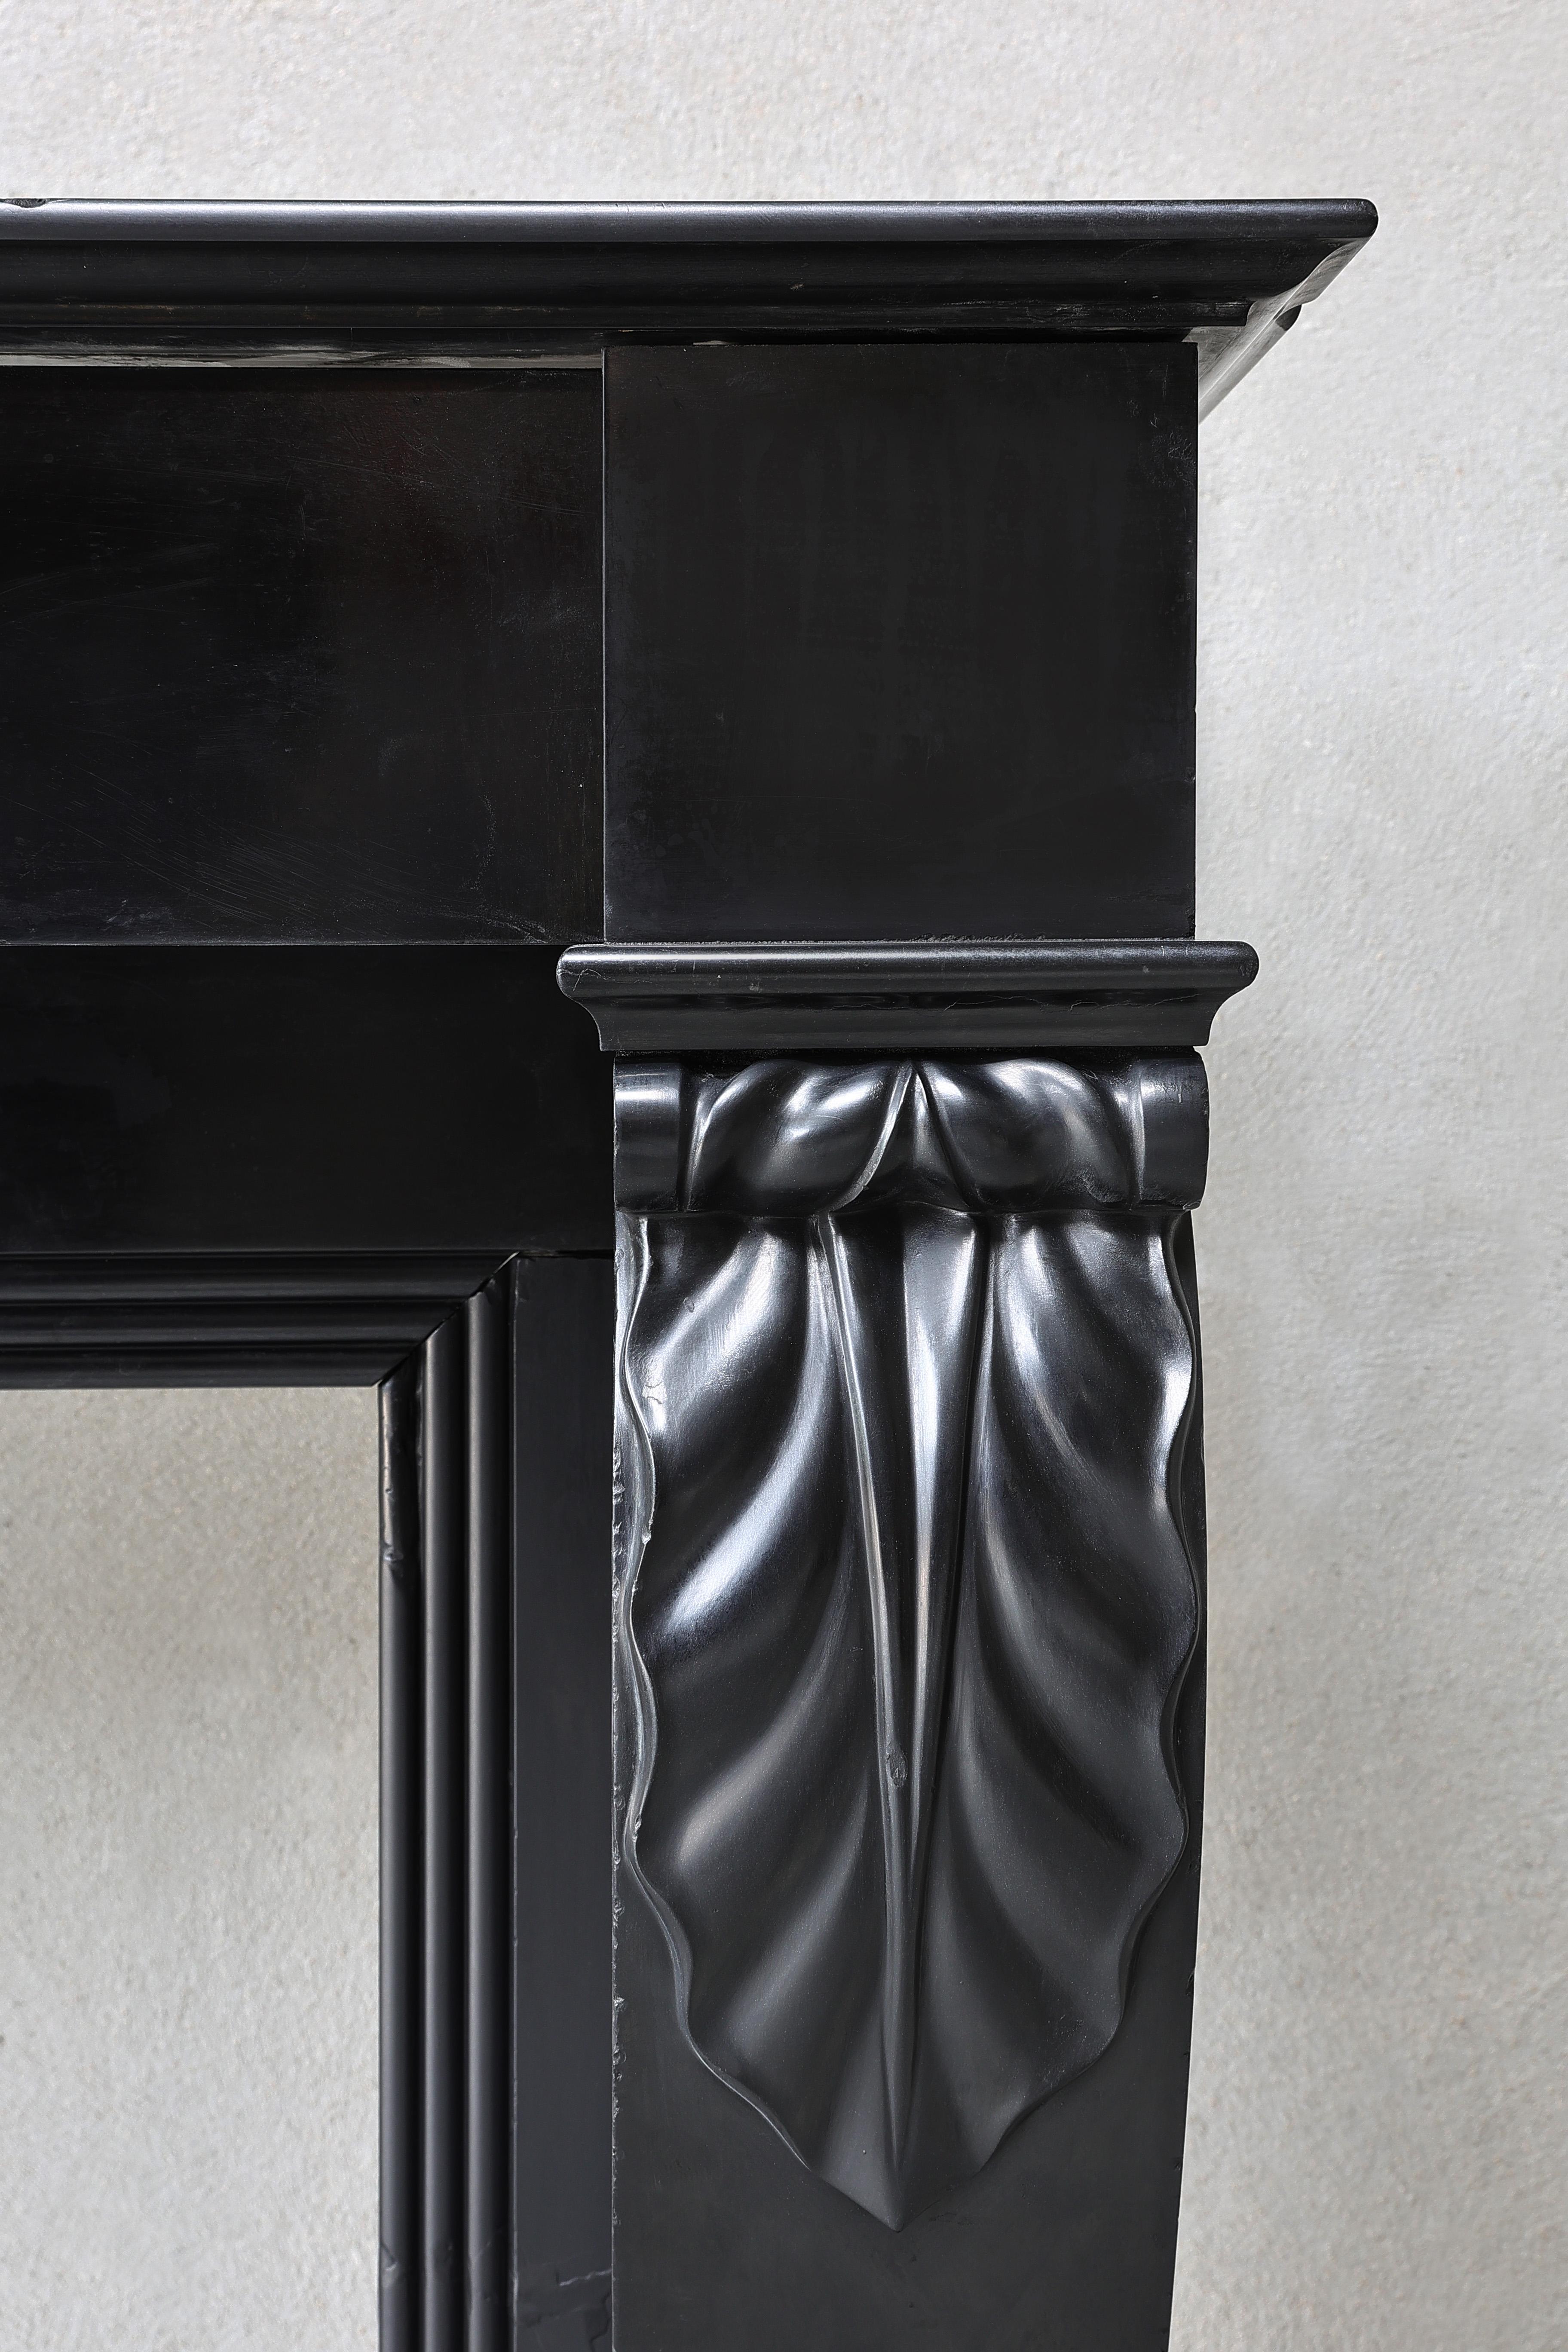 Noir De Mazy Marble Fireplace from the 19th Century in Style of Louis XVI For Sale 3